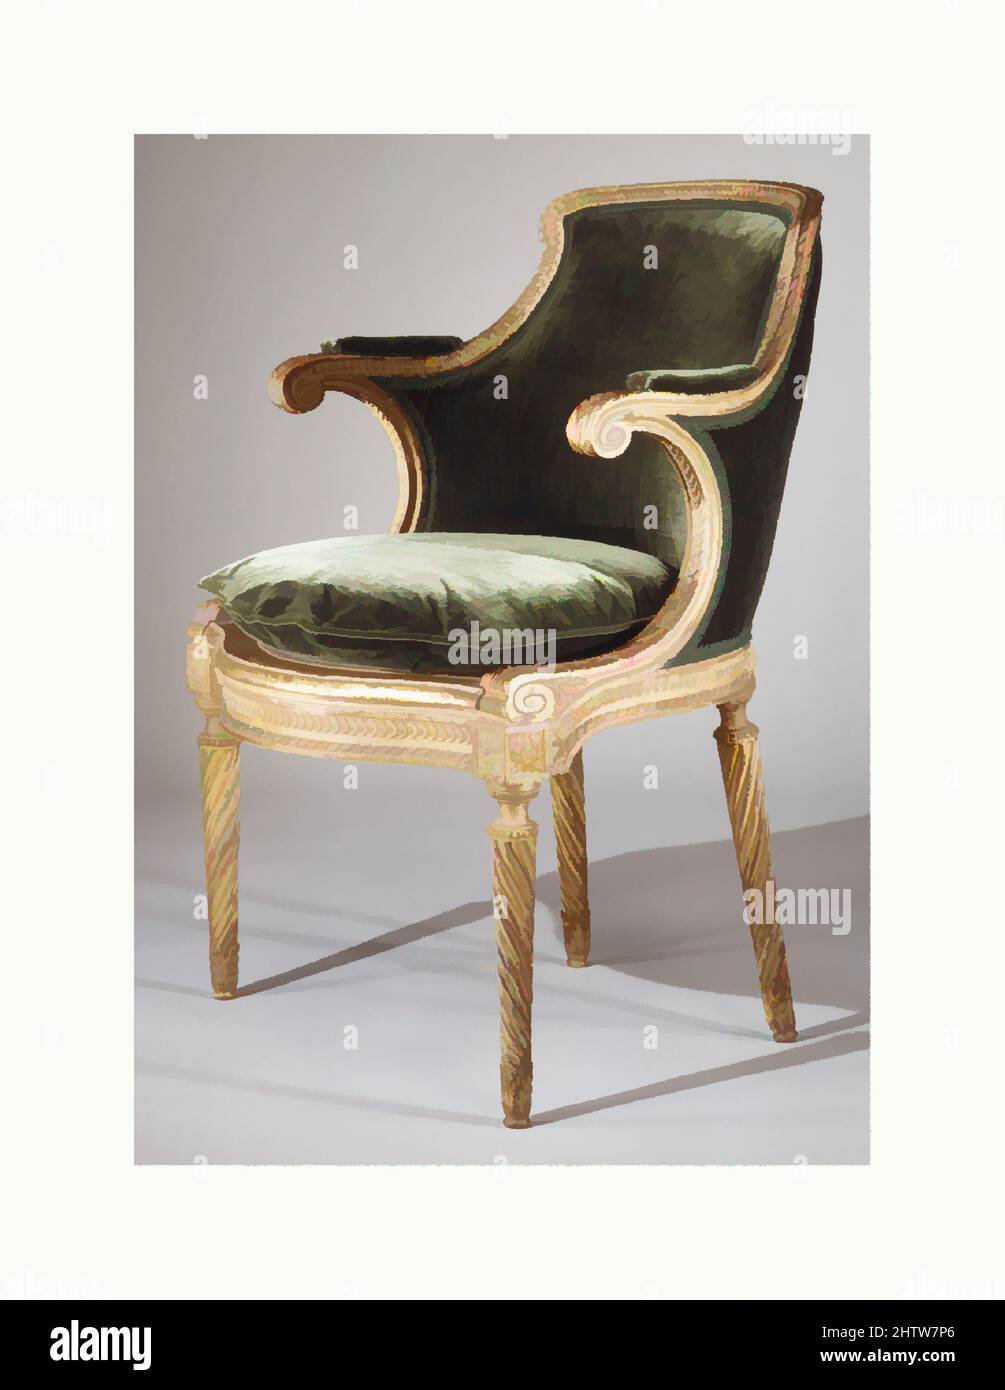 Art inspired by Armchair, Georges Jacob (French, 1739–1814), ca. 1785, French, Carved and gilded beech; caning; modern silk velvet, H. 33-5/8 x W. 23-1/2 x D. 20 in. (85.4 x 59.7 x 50.8 cm), Woodwork-Furniture, Georges Jacob (French, 1739–1814, Classic works modernized by Artotop with a splash of modernity. Shapes, color and value, eye-catching visual impact on art. Emotions through freedom of artworks in a contemporary way. A timeless message pursuing a wildly creative new direction. Artists turning to the digital medium and creating the Artotop NFT Stock Photo